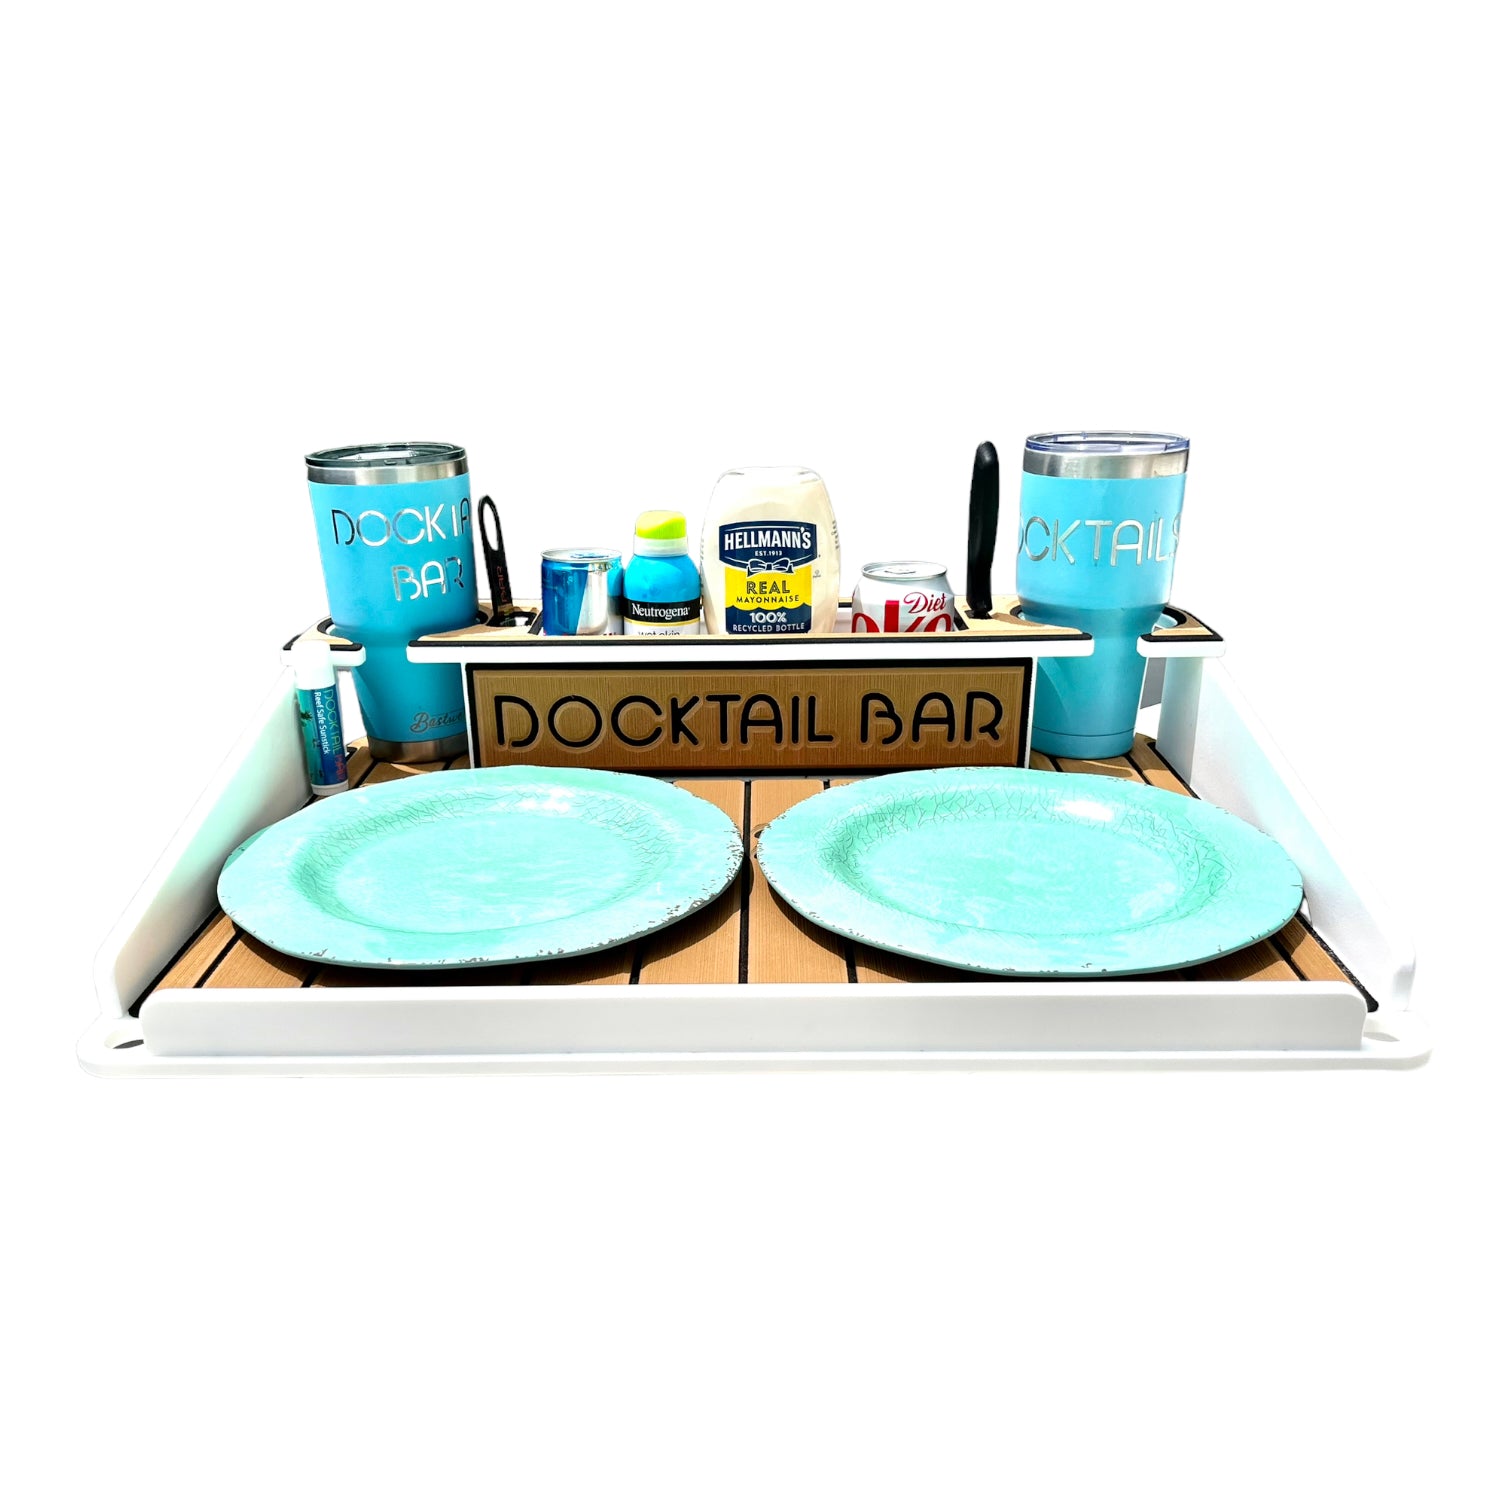 Docktail Boat Utility Table and All Angle Adjustable Rod Holder